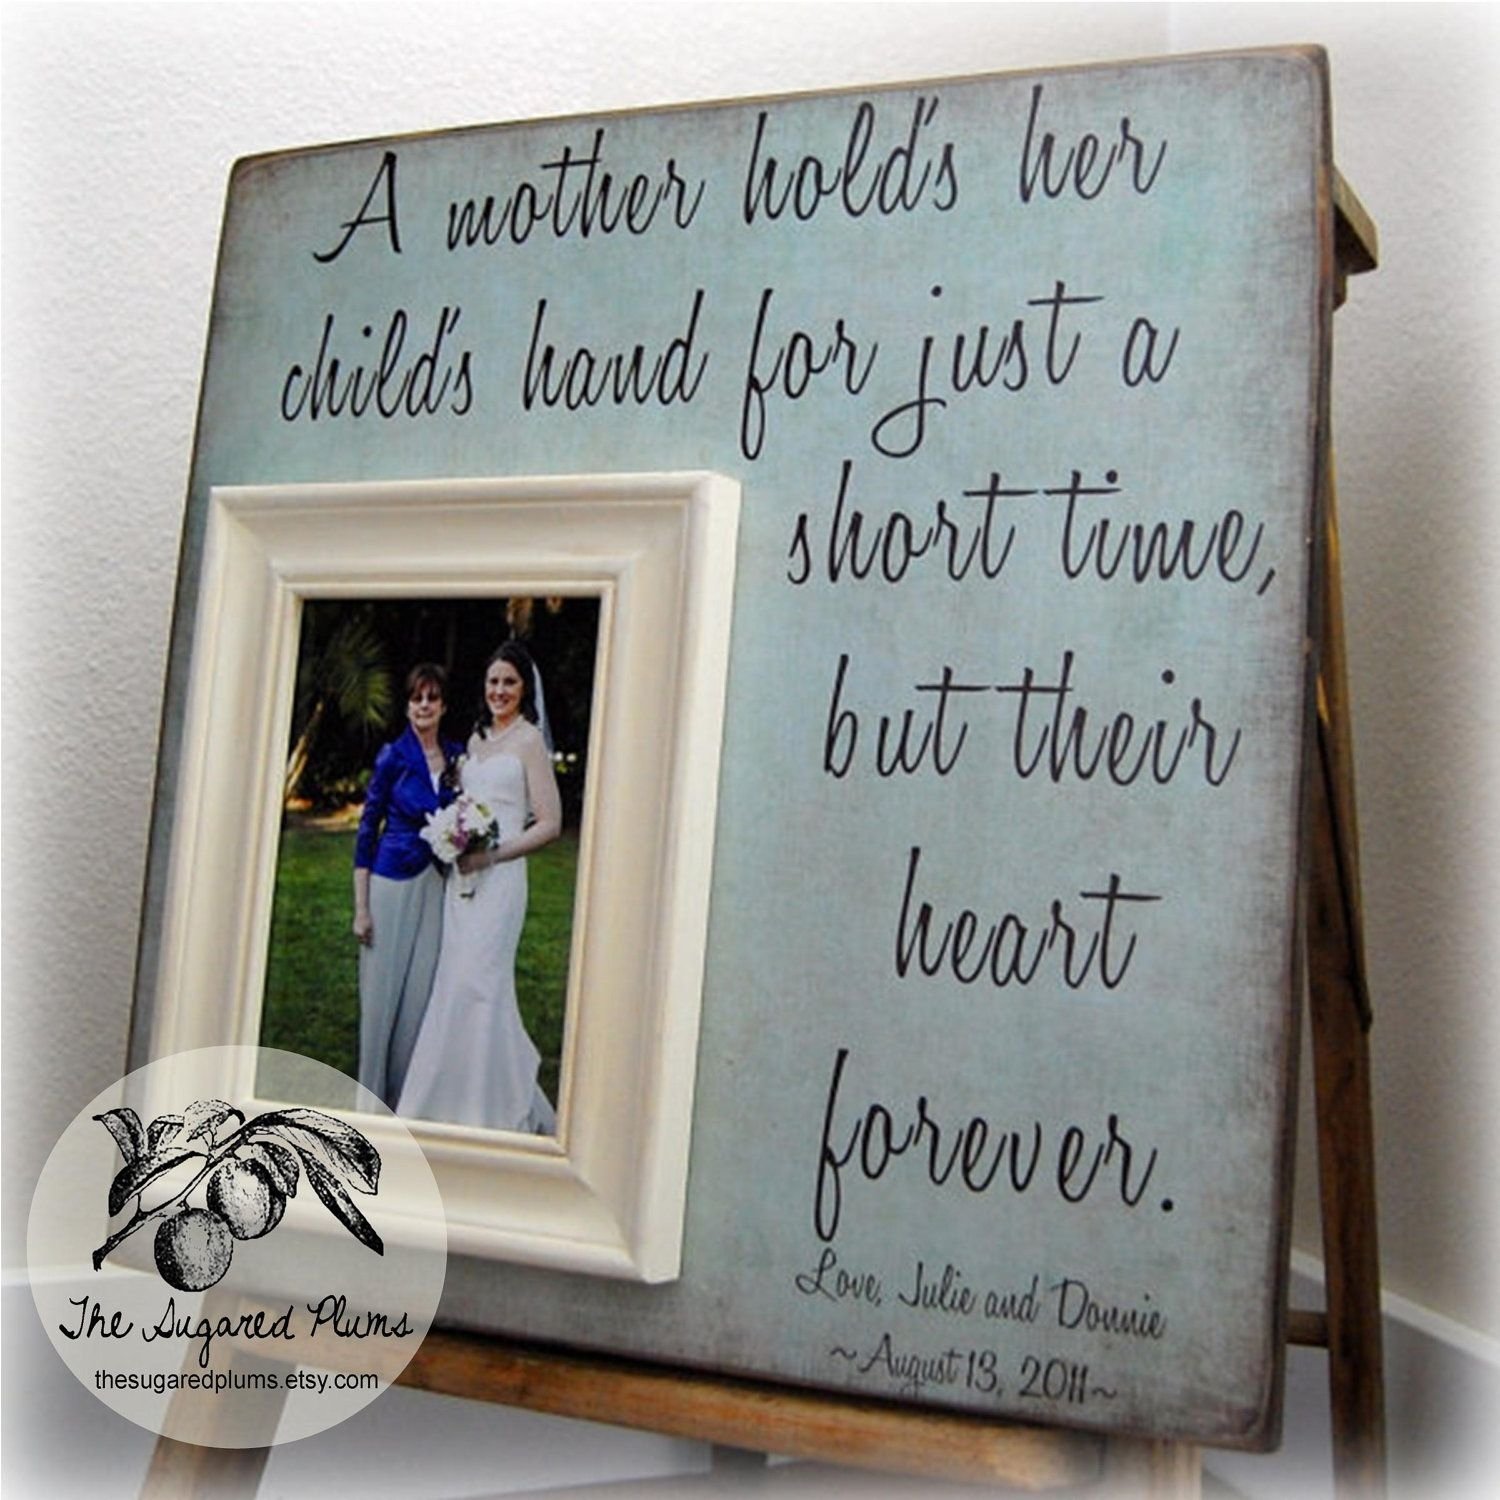 10 Nice Gift Ideas For Mother Of The Bride best mother of the bride gifts personalized picture frame a mother 6 2022